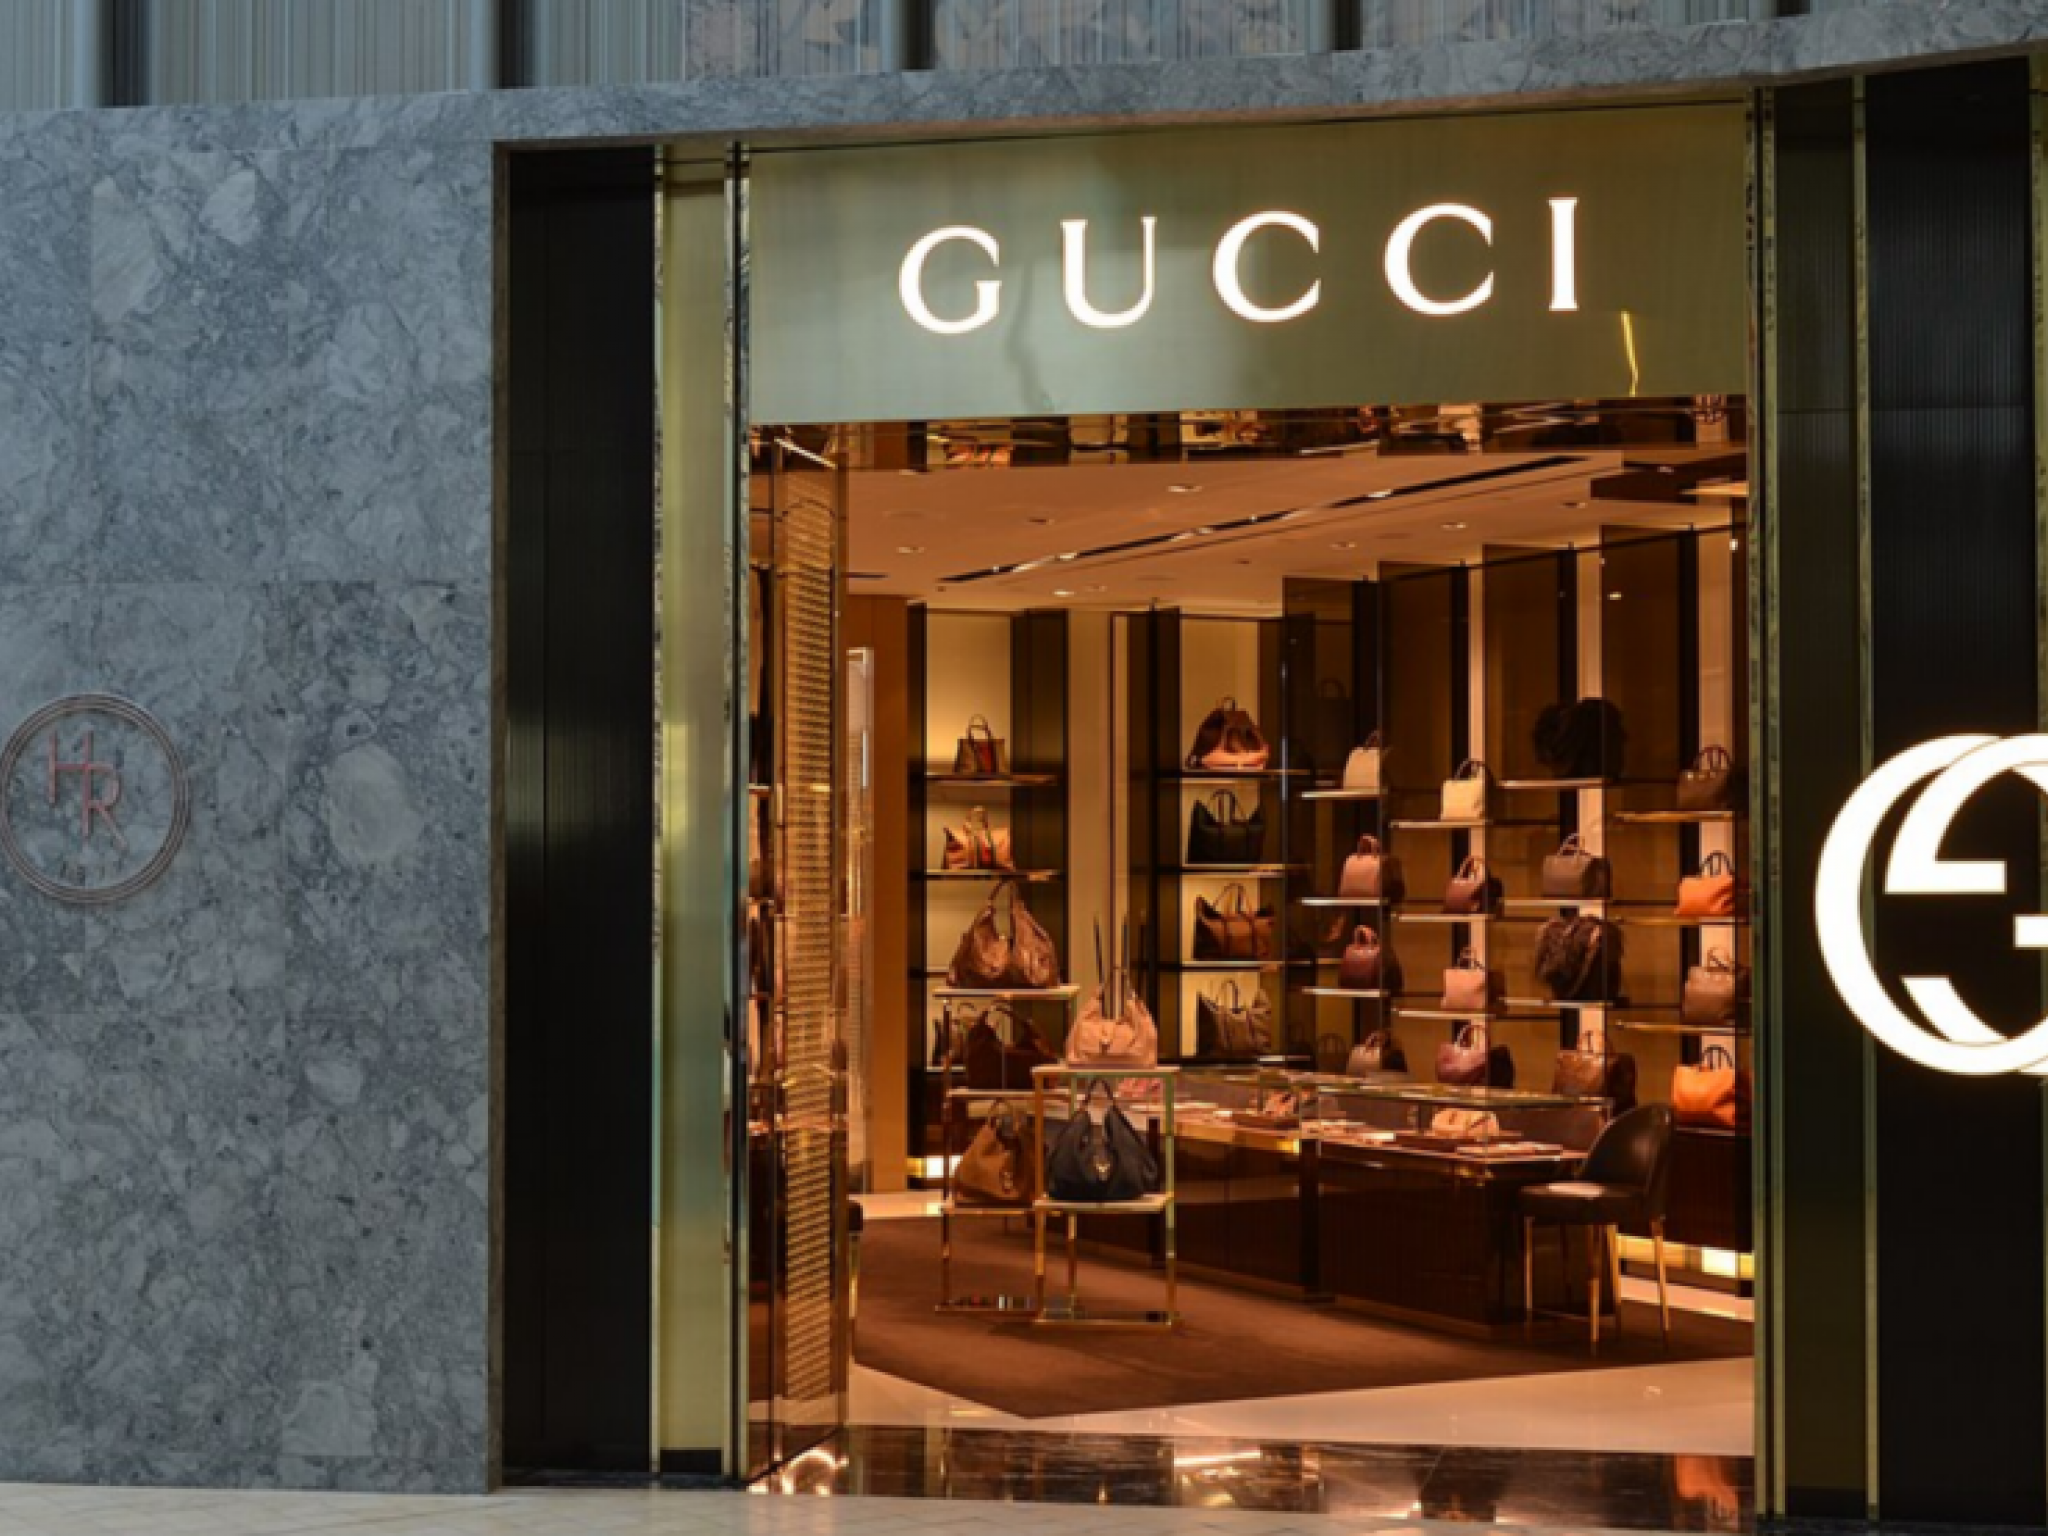  gucci-glamour-on-fifth-avenue-parent-firm-kering-seals-deal-with-963m-manhattan-tower 